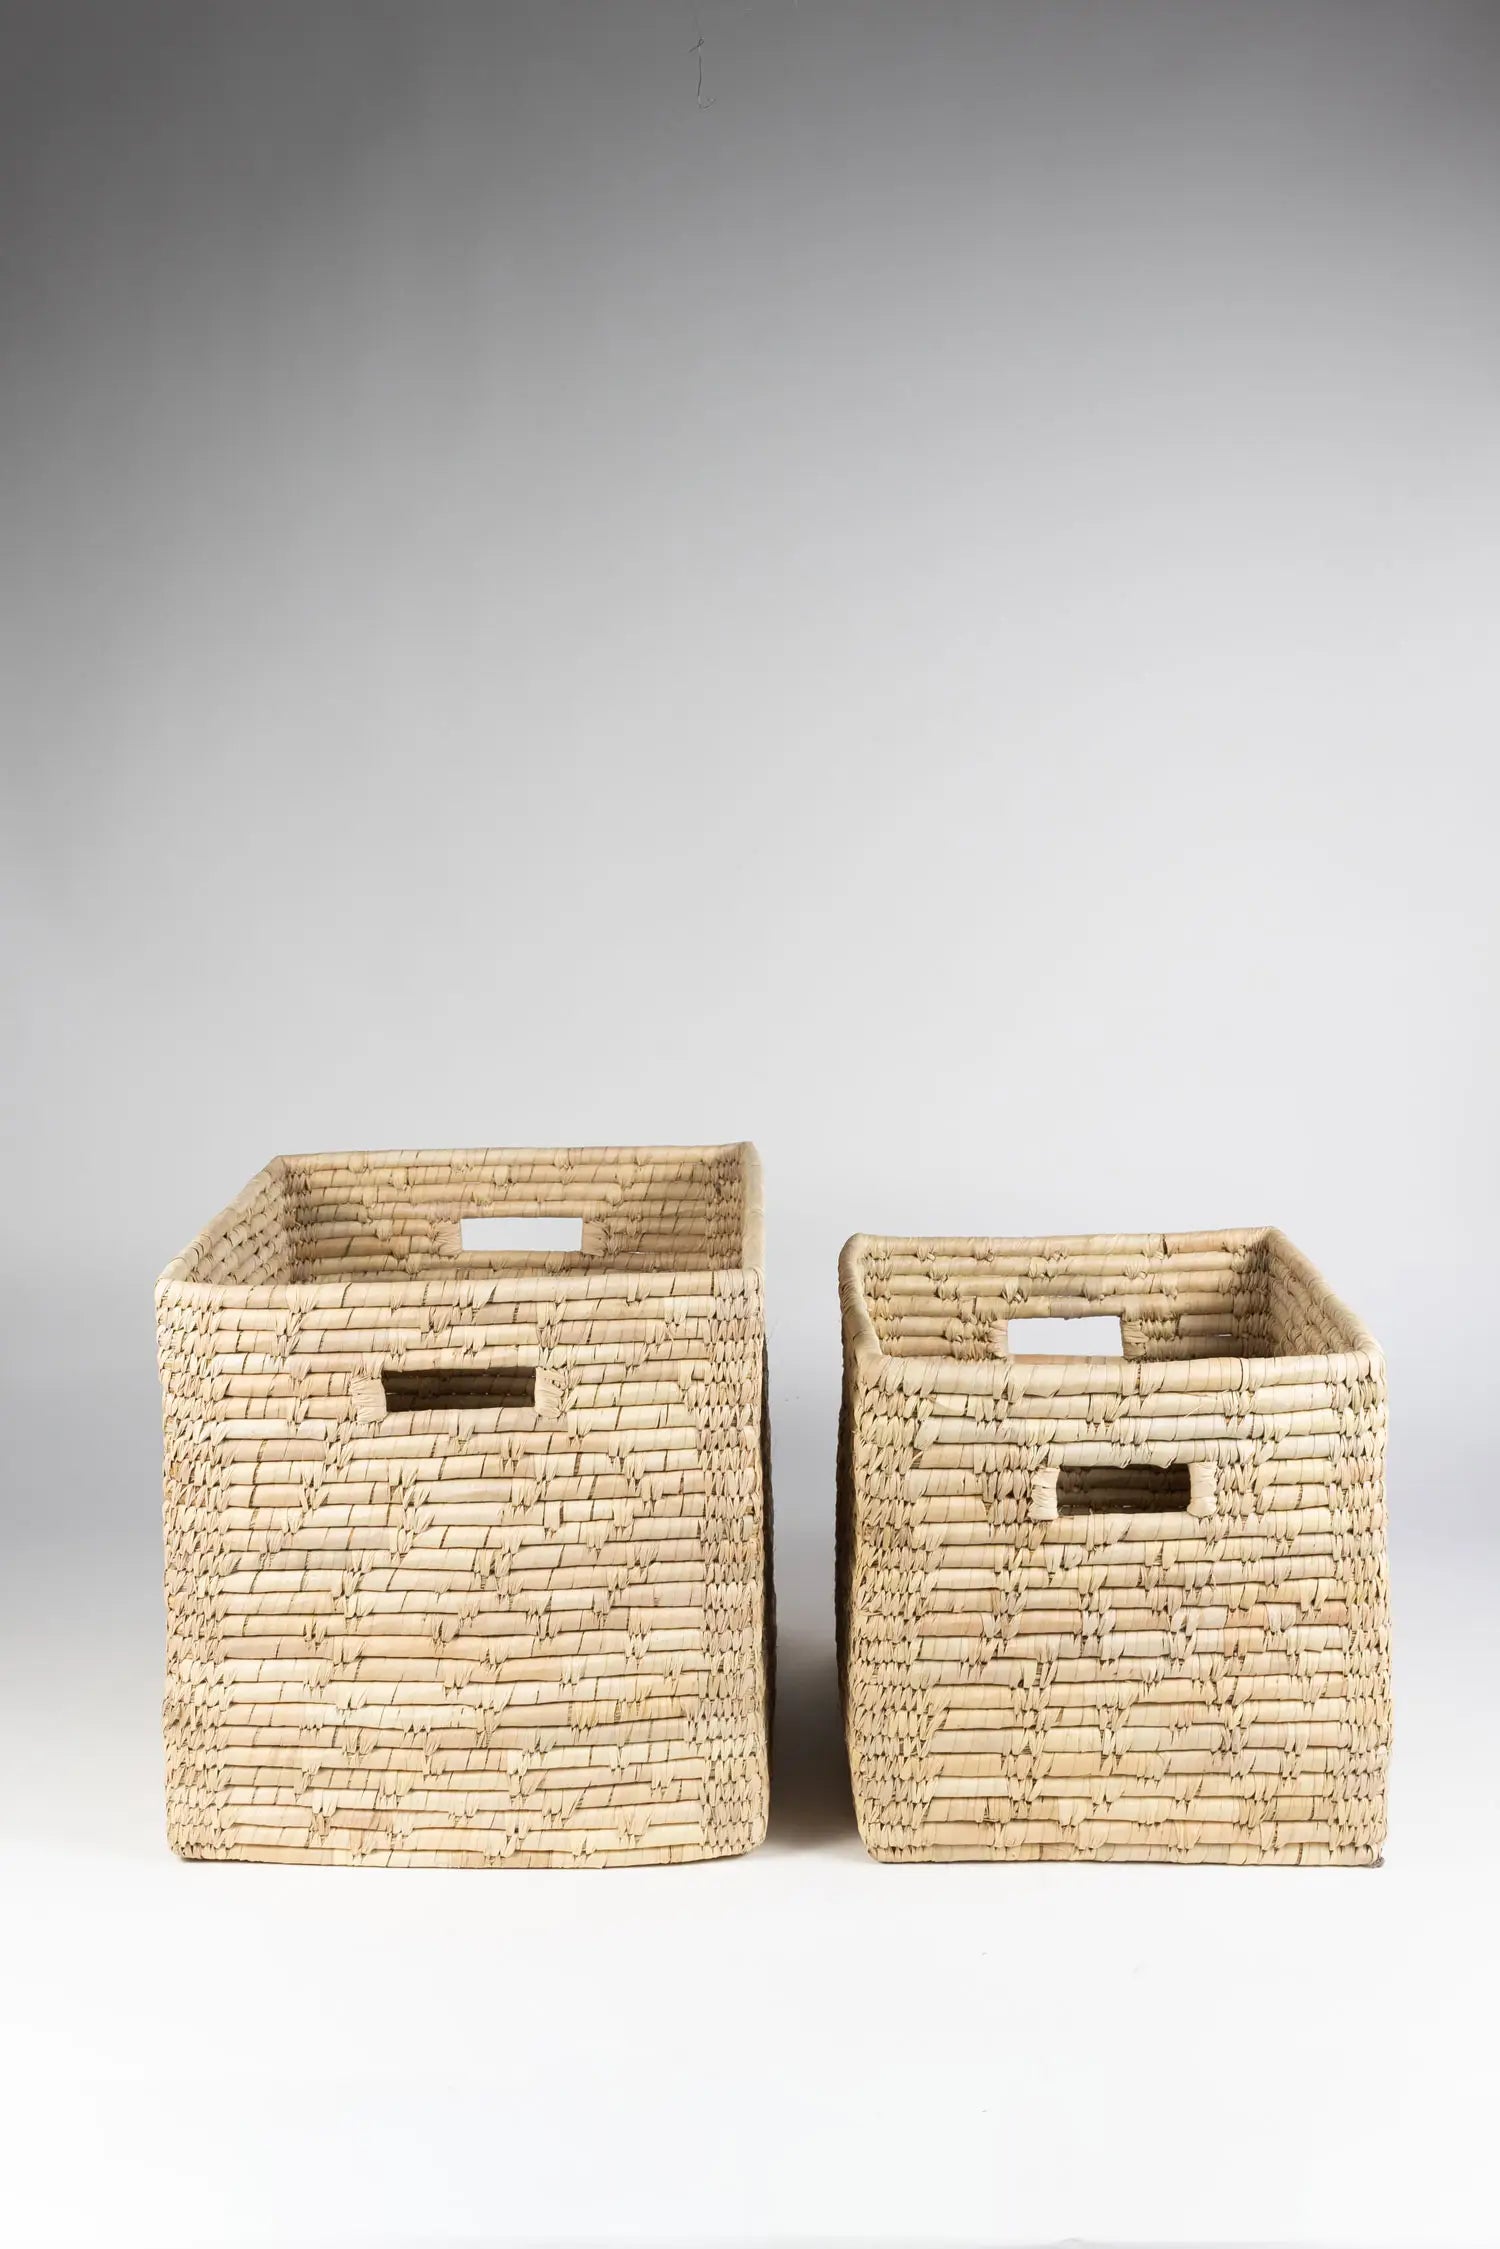 Woven Storage Baskets  Handcrafted with Palm Leaves – The Citizenry